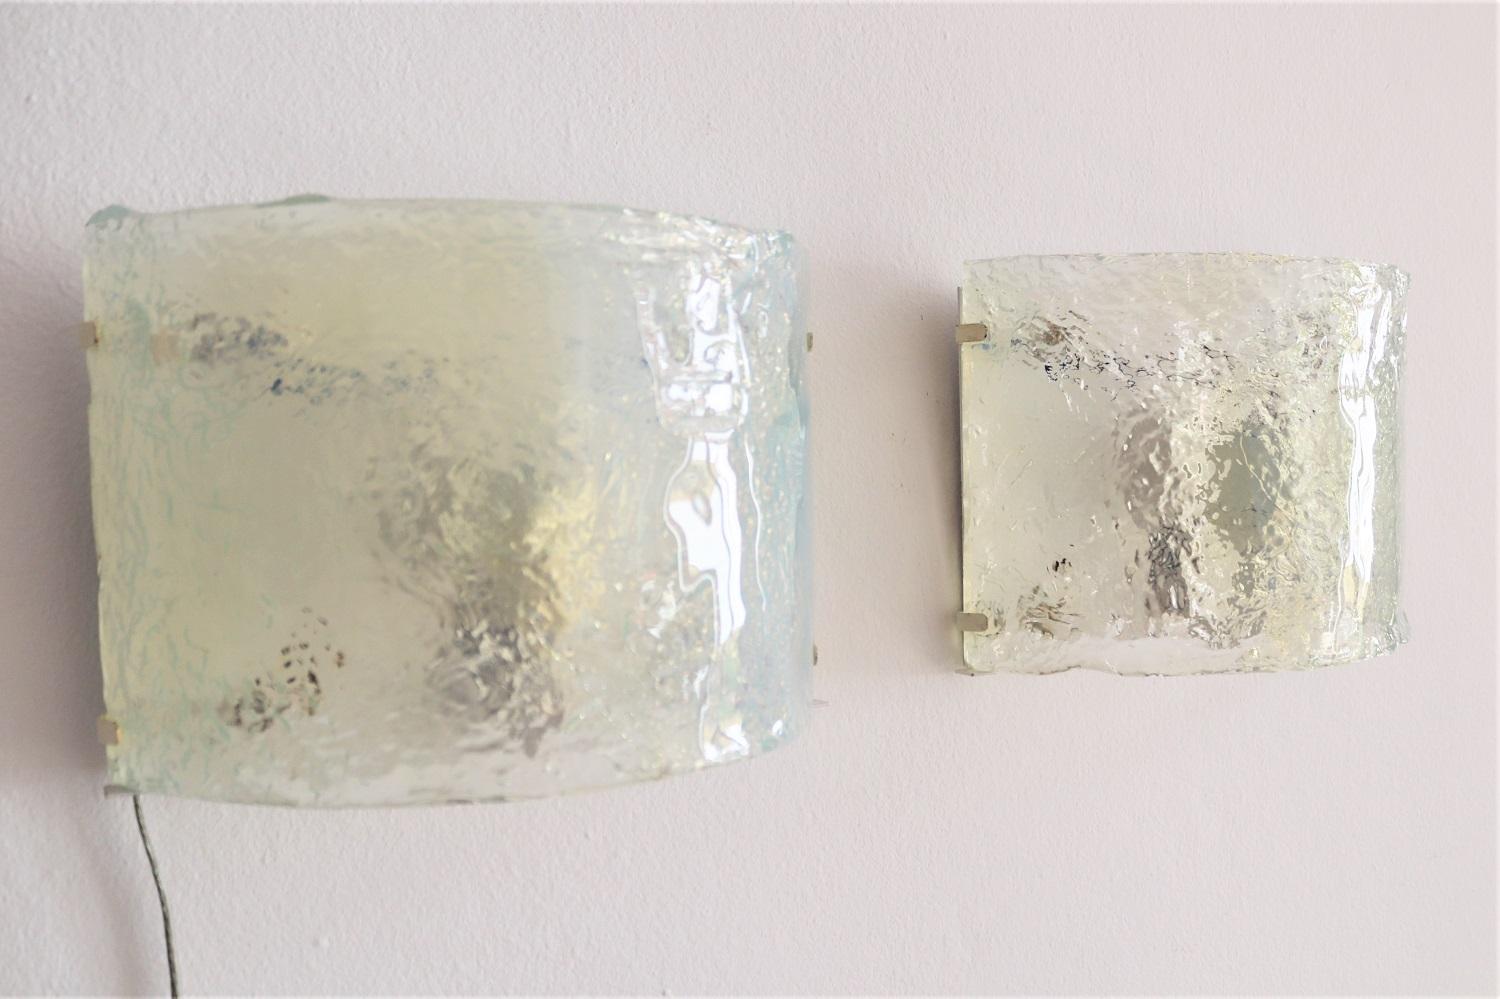 Beautiful set of two wall sconces made of gorgeous curved opaline Murano glass and white metal wall bracket.
Designed by Carlo Nason and manufactures by Mazzega.
Made in Italy during the 1970s.
The opalescent glasses leave a magical impression, as